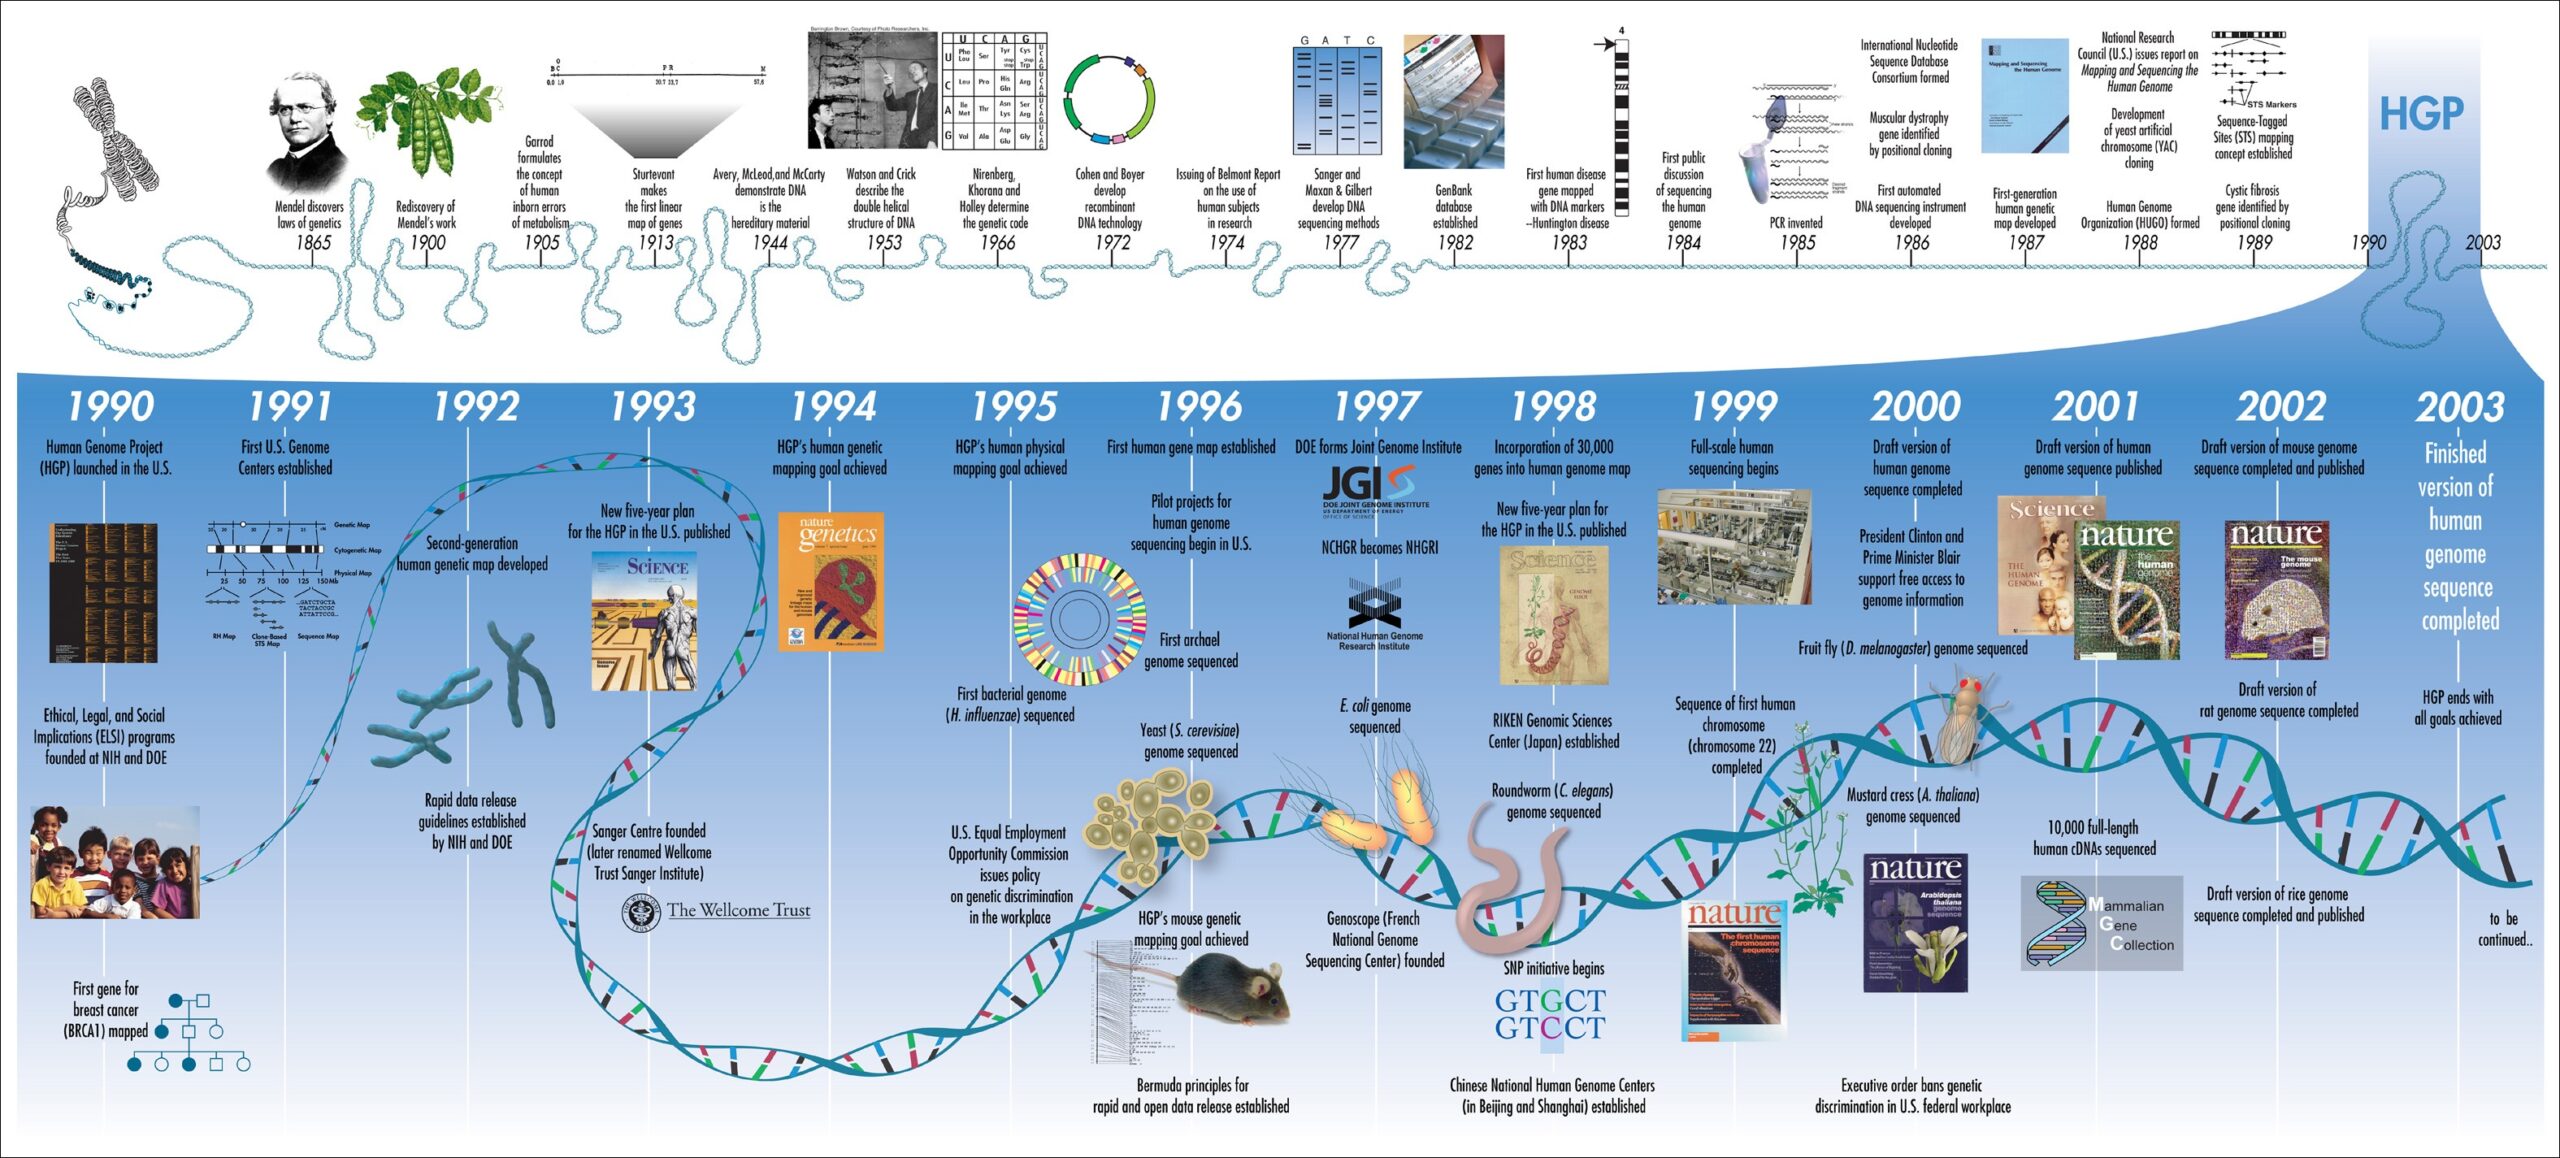 The Human Genome Project Timeline contains major milestones in genetic research from 1865 to 2003 [Credit: Human Genome Project Timeline]